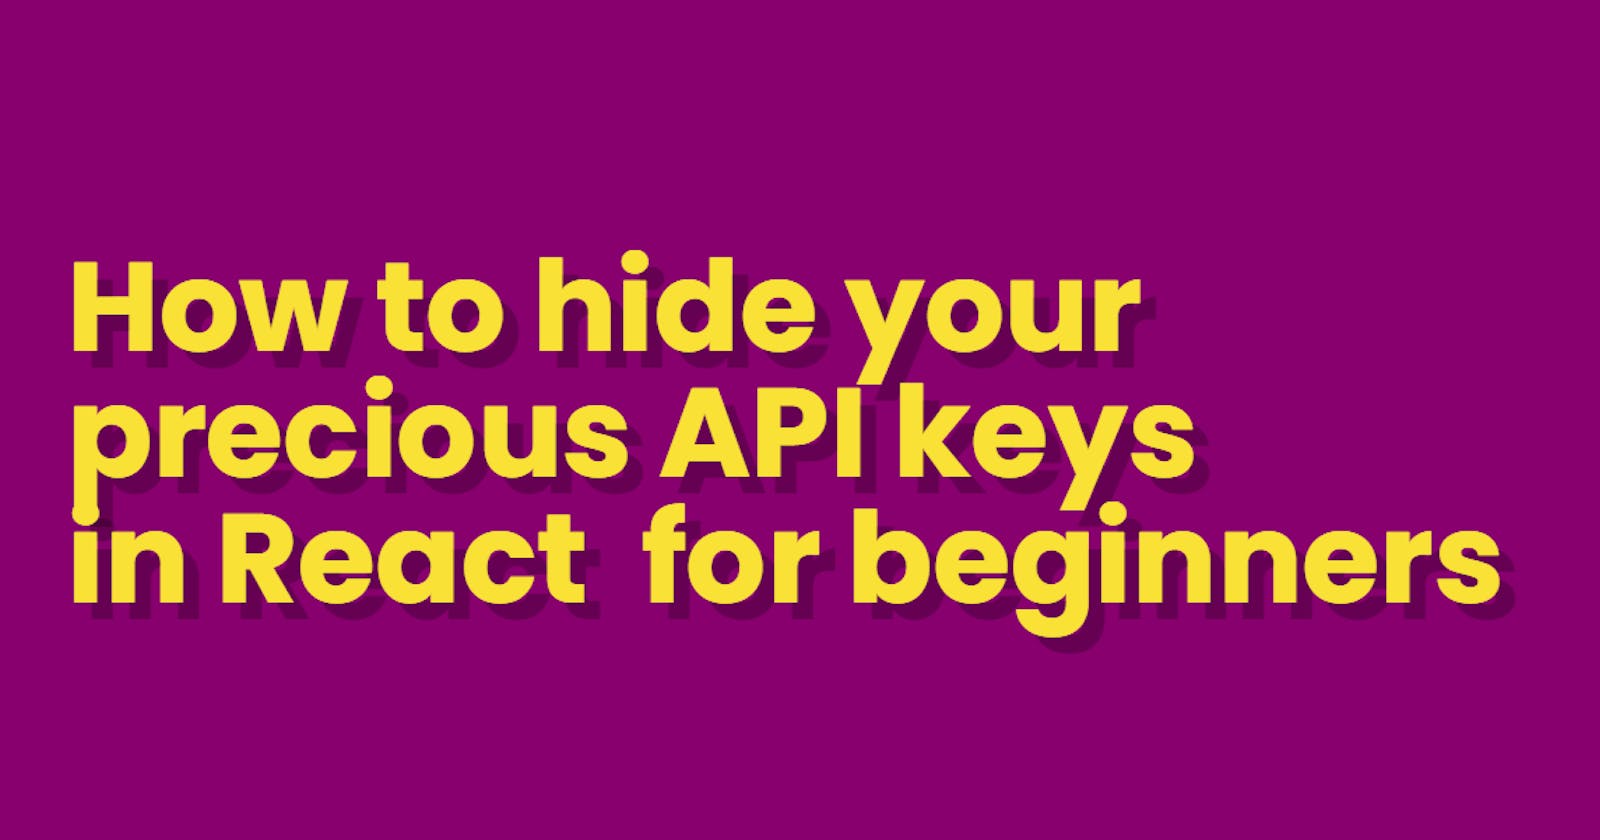 How to hide your precious API keys in React for beginners.